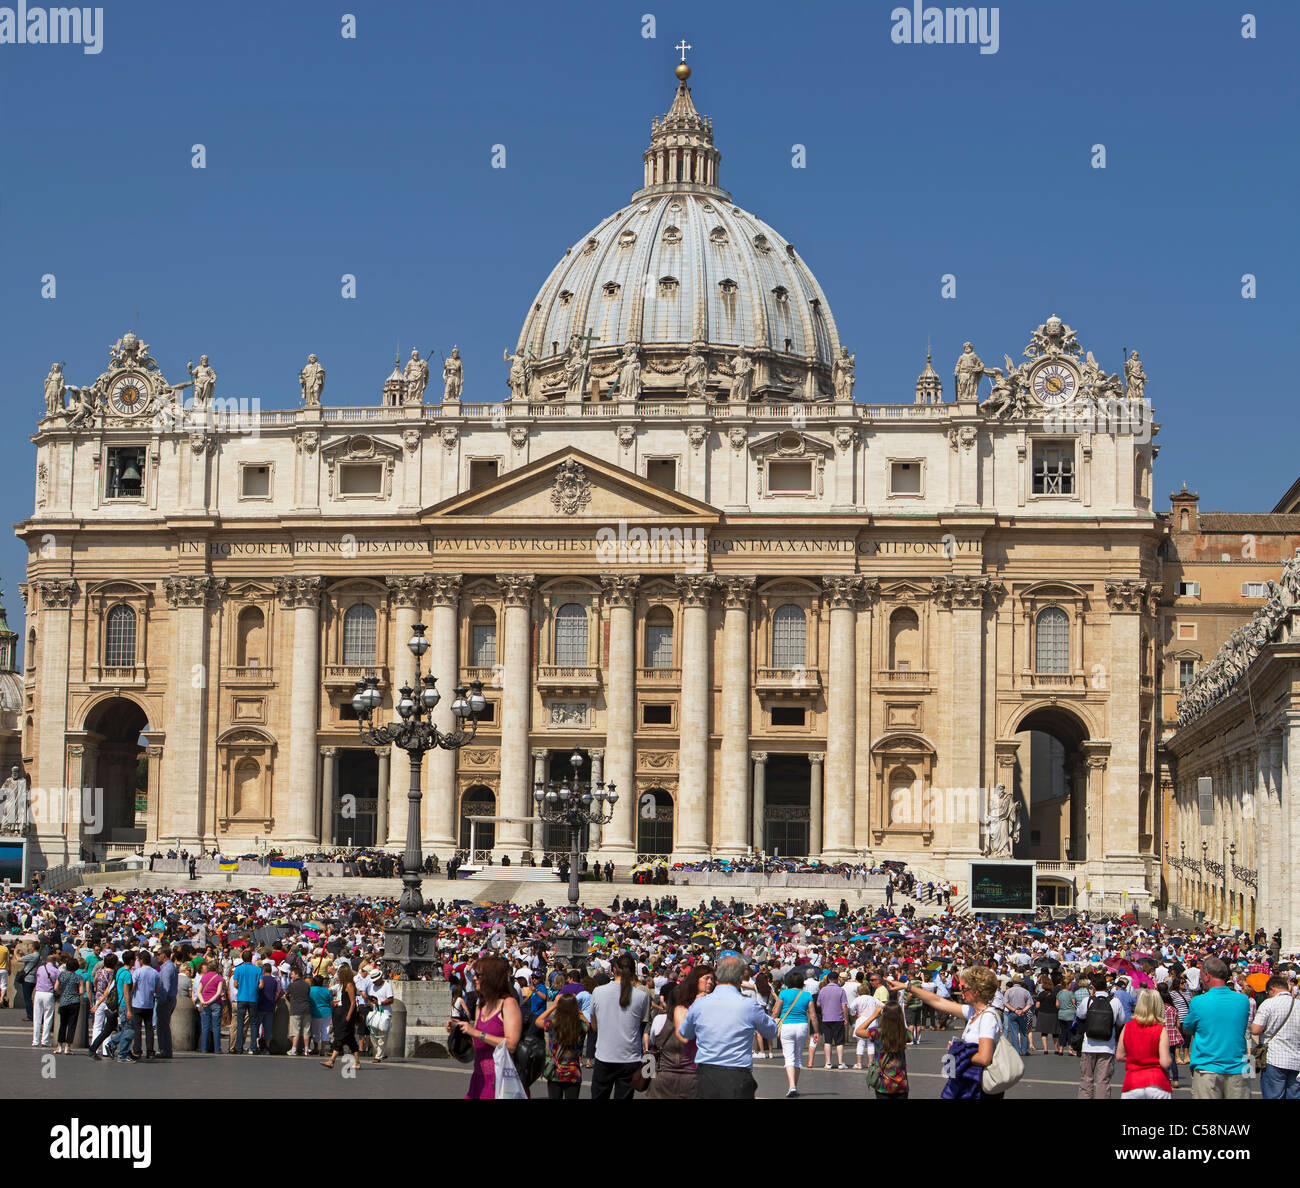 Vatican City Saint Peter's Square from center courtyard with crowds of people waiting to hear the Pope speak. Stock Photo